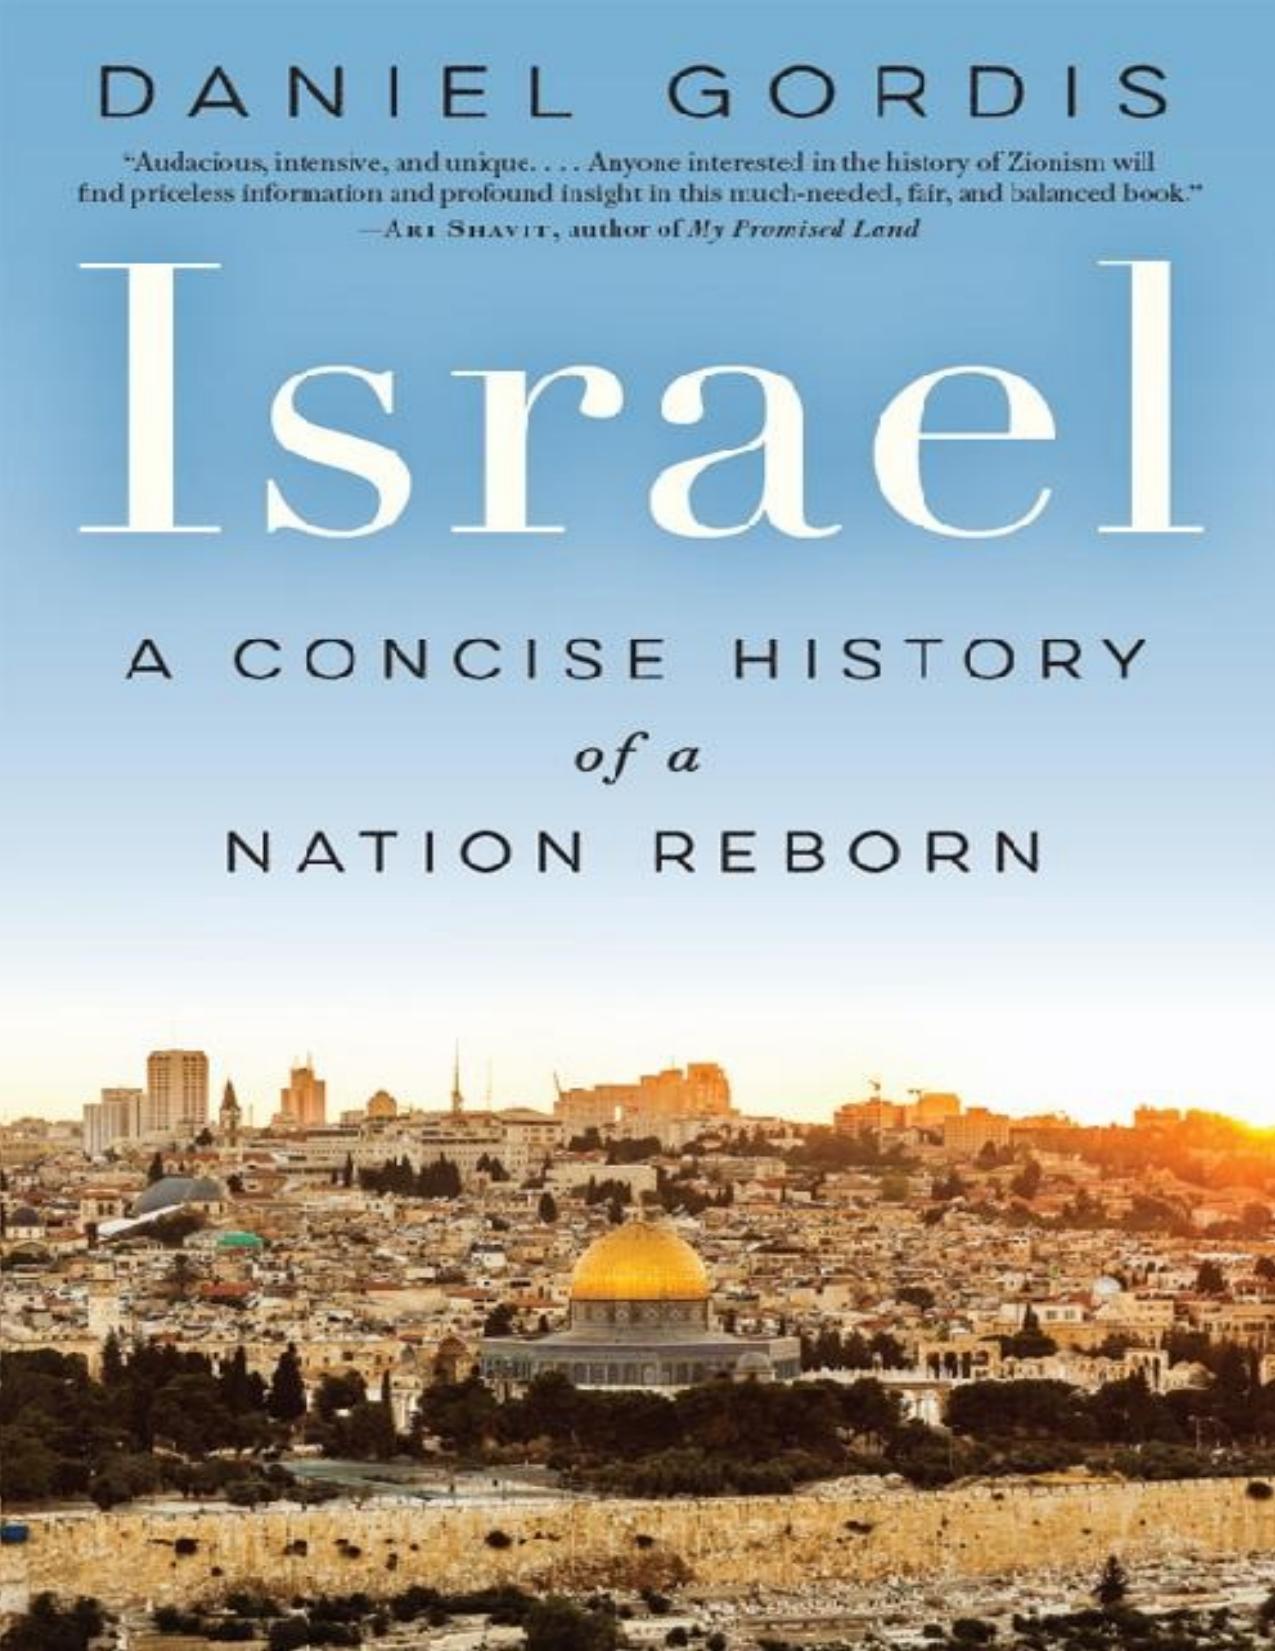 Israel: A Concise History of a Nation Reborn - PDFDrive.com